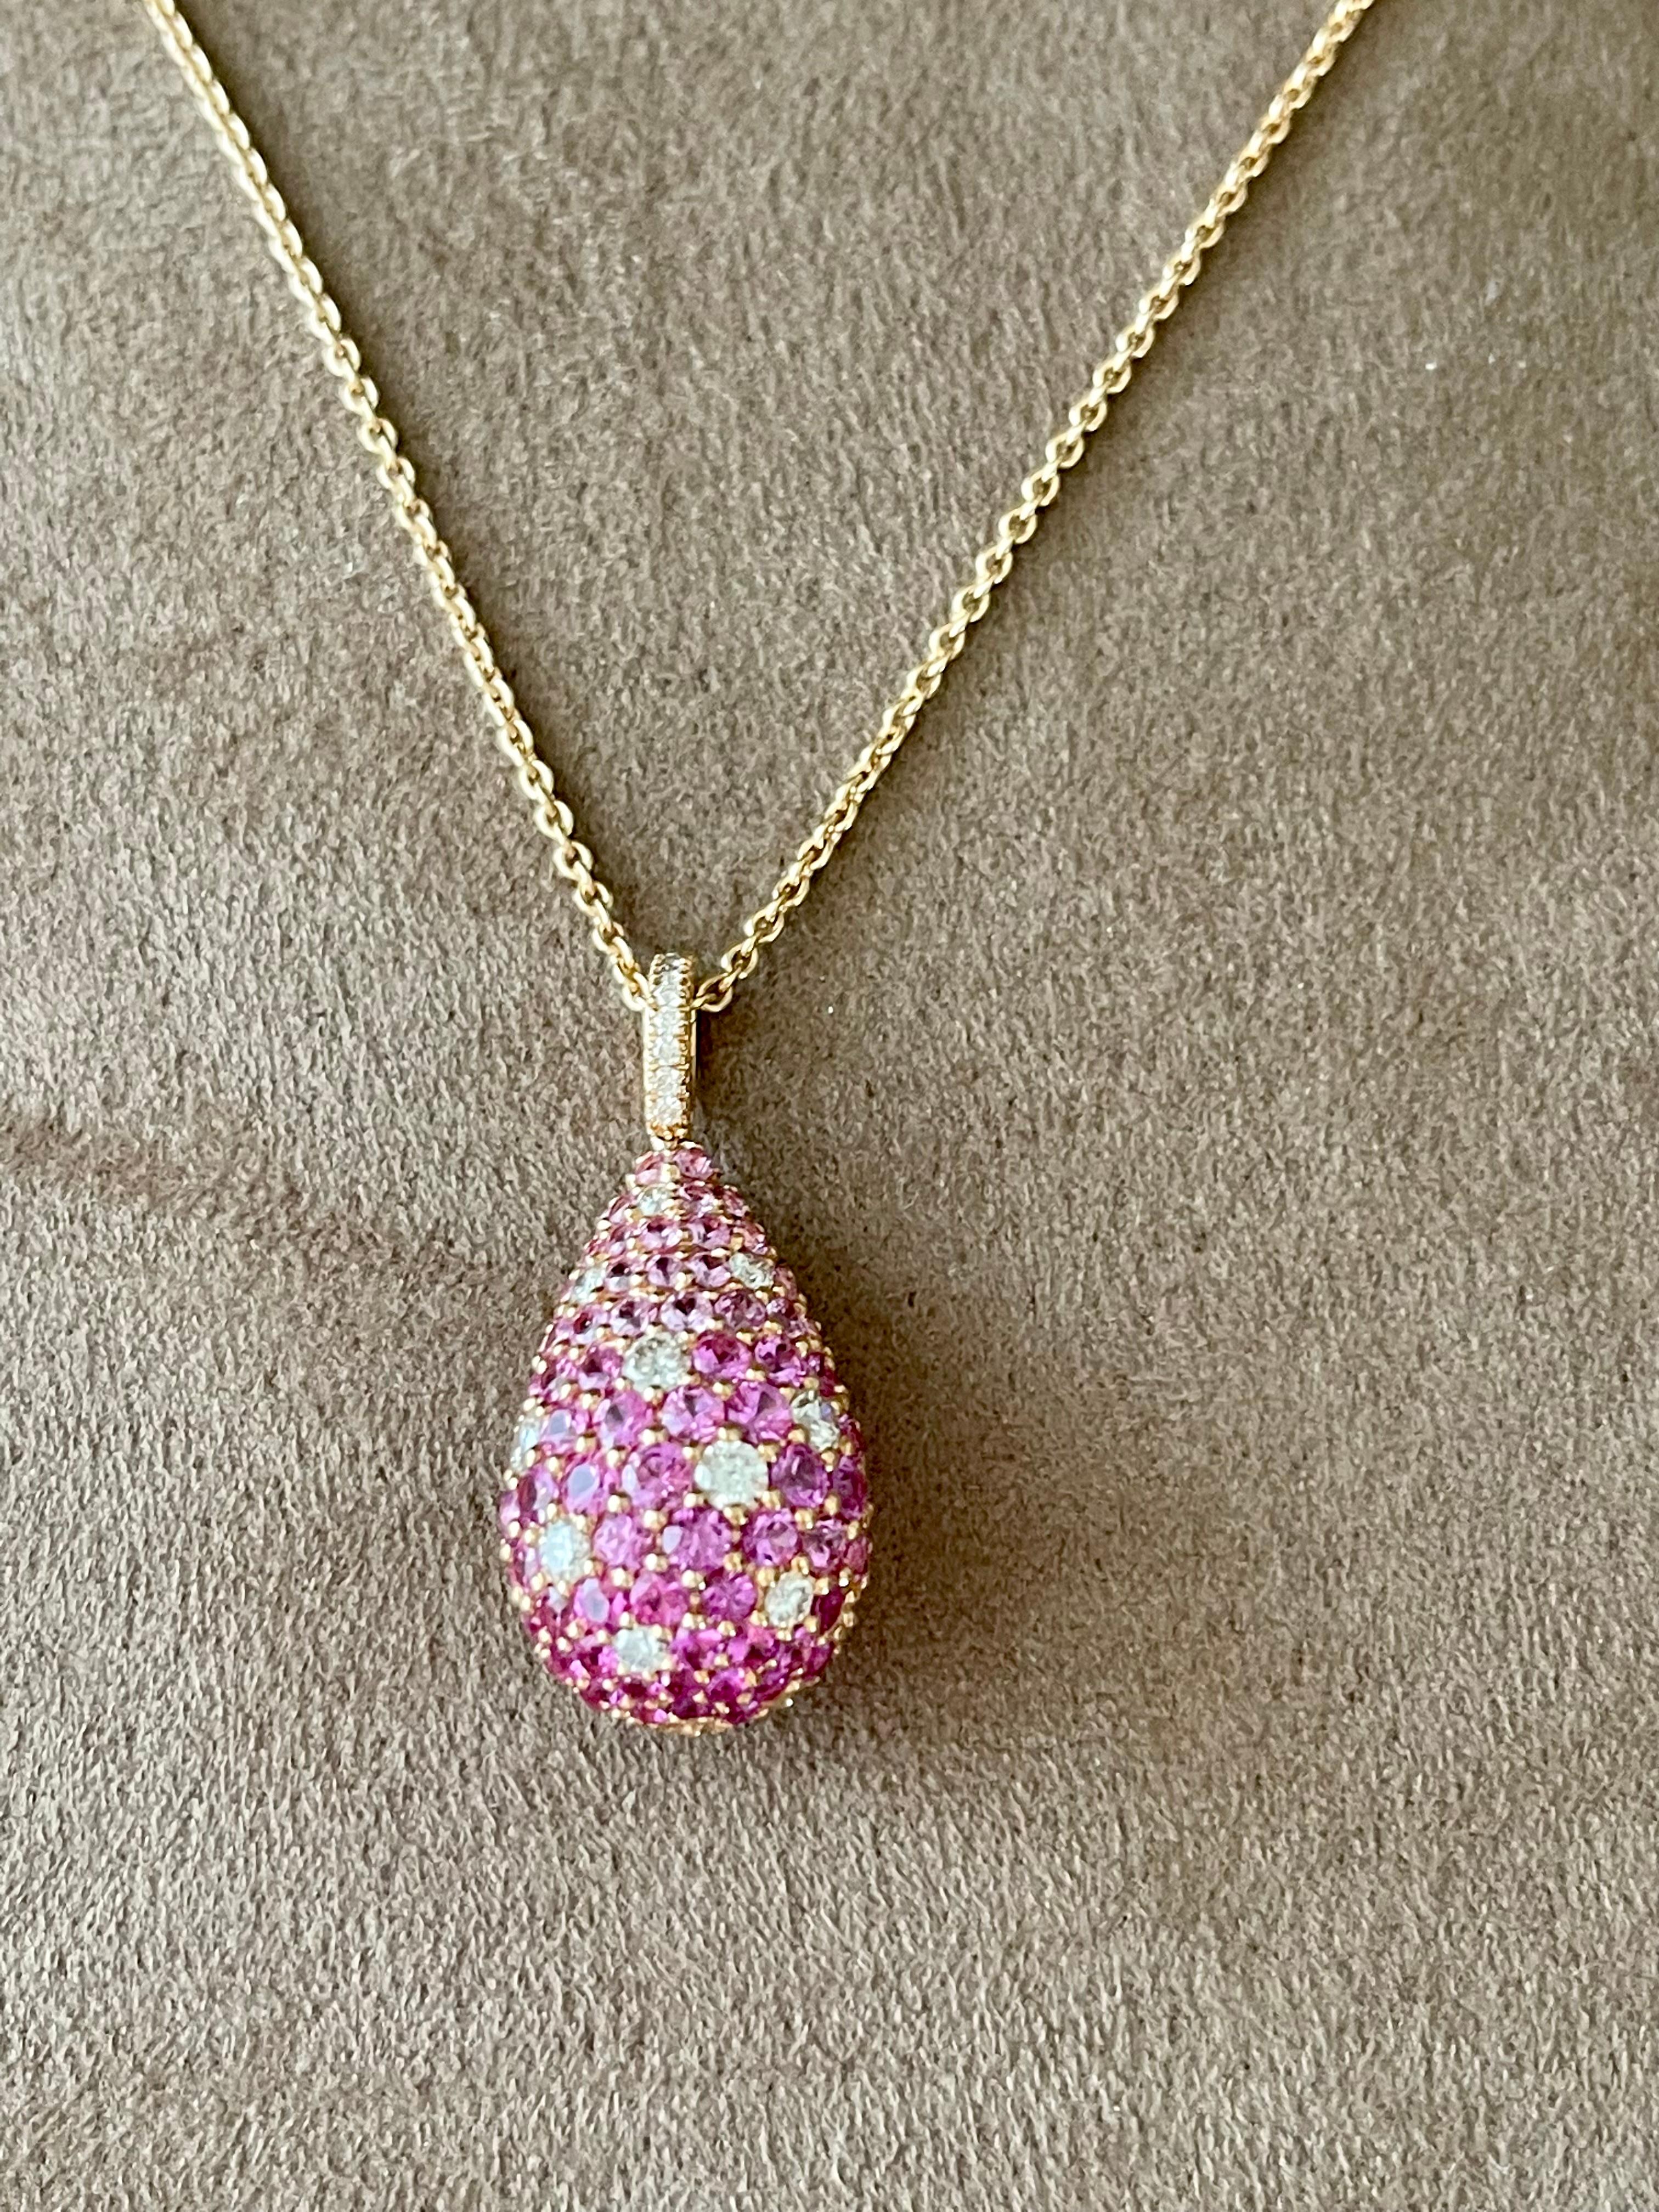 Very attractive bombé style pendant pavé set with 71 pink Sapphires weighing 3.06 ct and 17 brillinat cut Diamonds weighing 0.55 ct, G color, vs clarity.
Length of the chain 40 cm. Dimensions of the pendant: 3.1 cm x 1.4 cm. 
Masterfully handcrafted